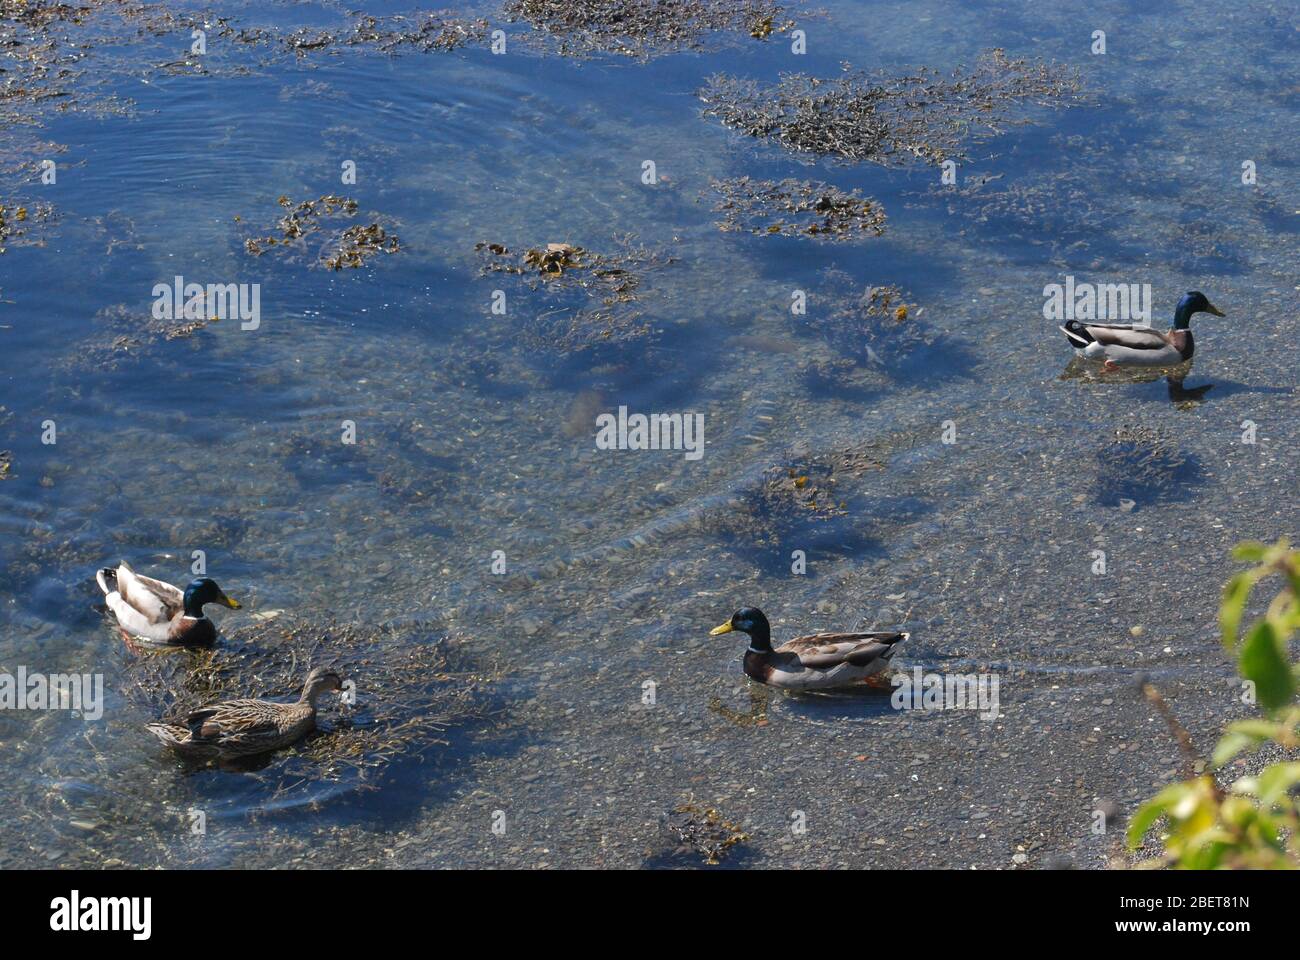 Ducks Swimming in Shallow water, Bantry Bay, West Cork, Ireland with copy space Stock Photo